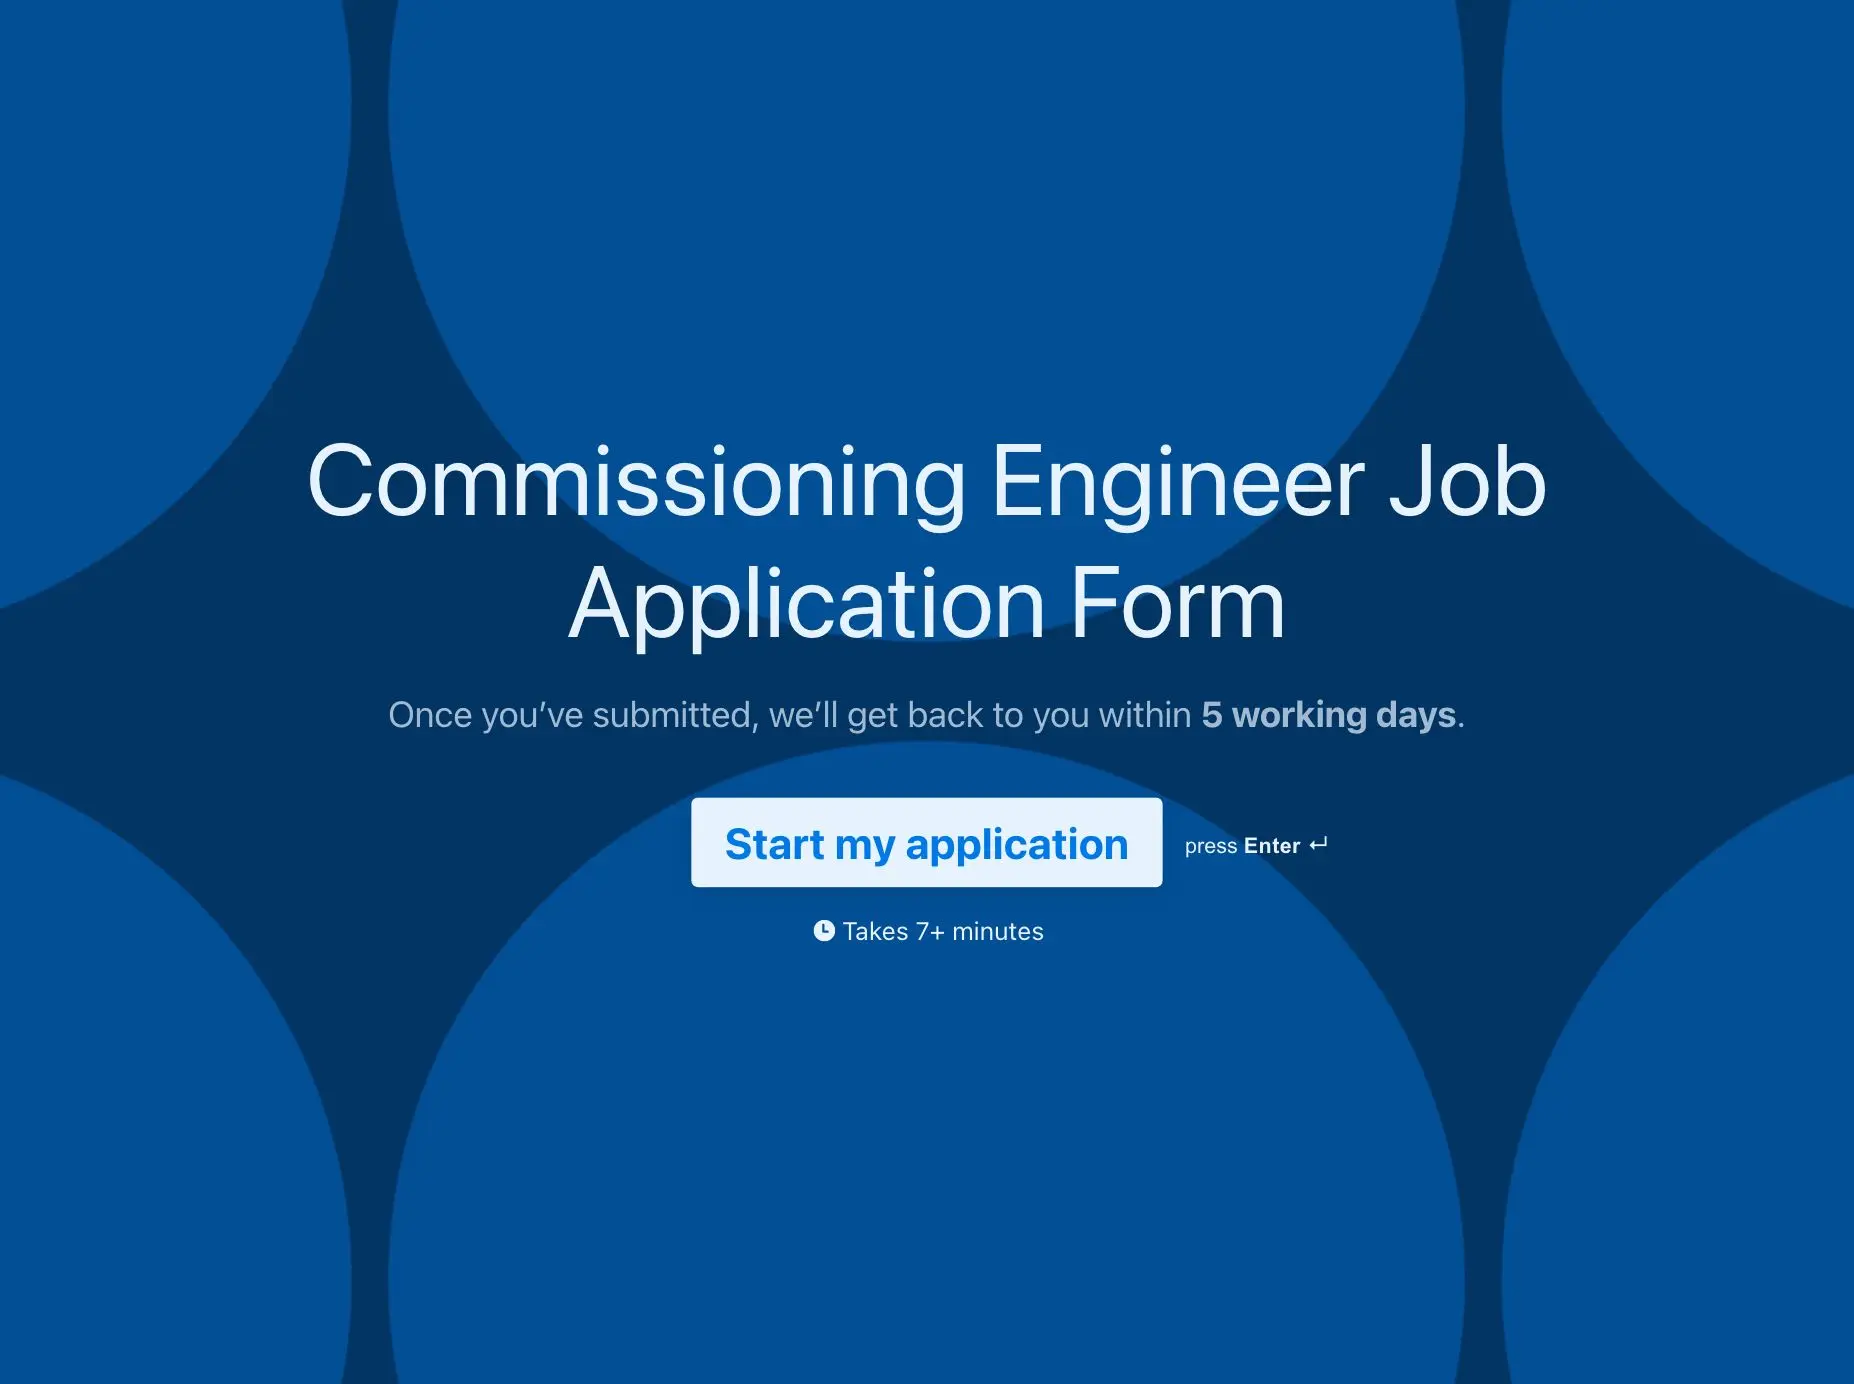 Commissioning Engineer Job Application Form Template Hero